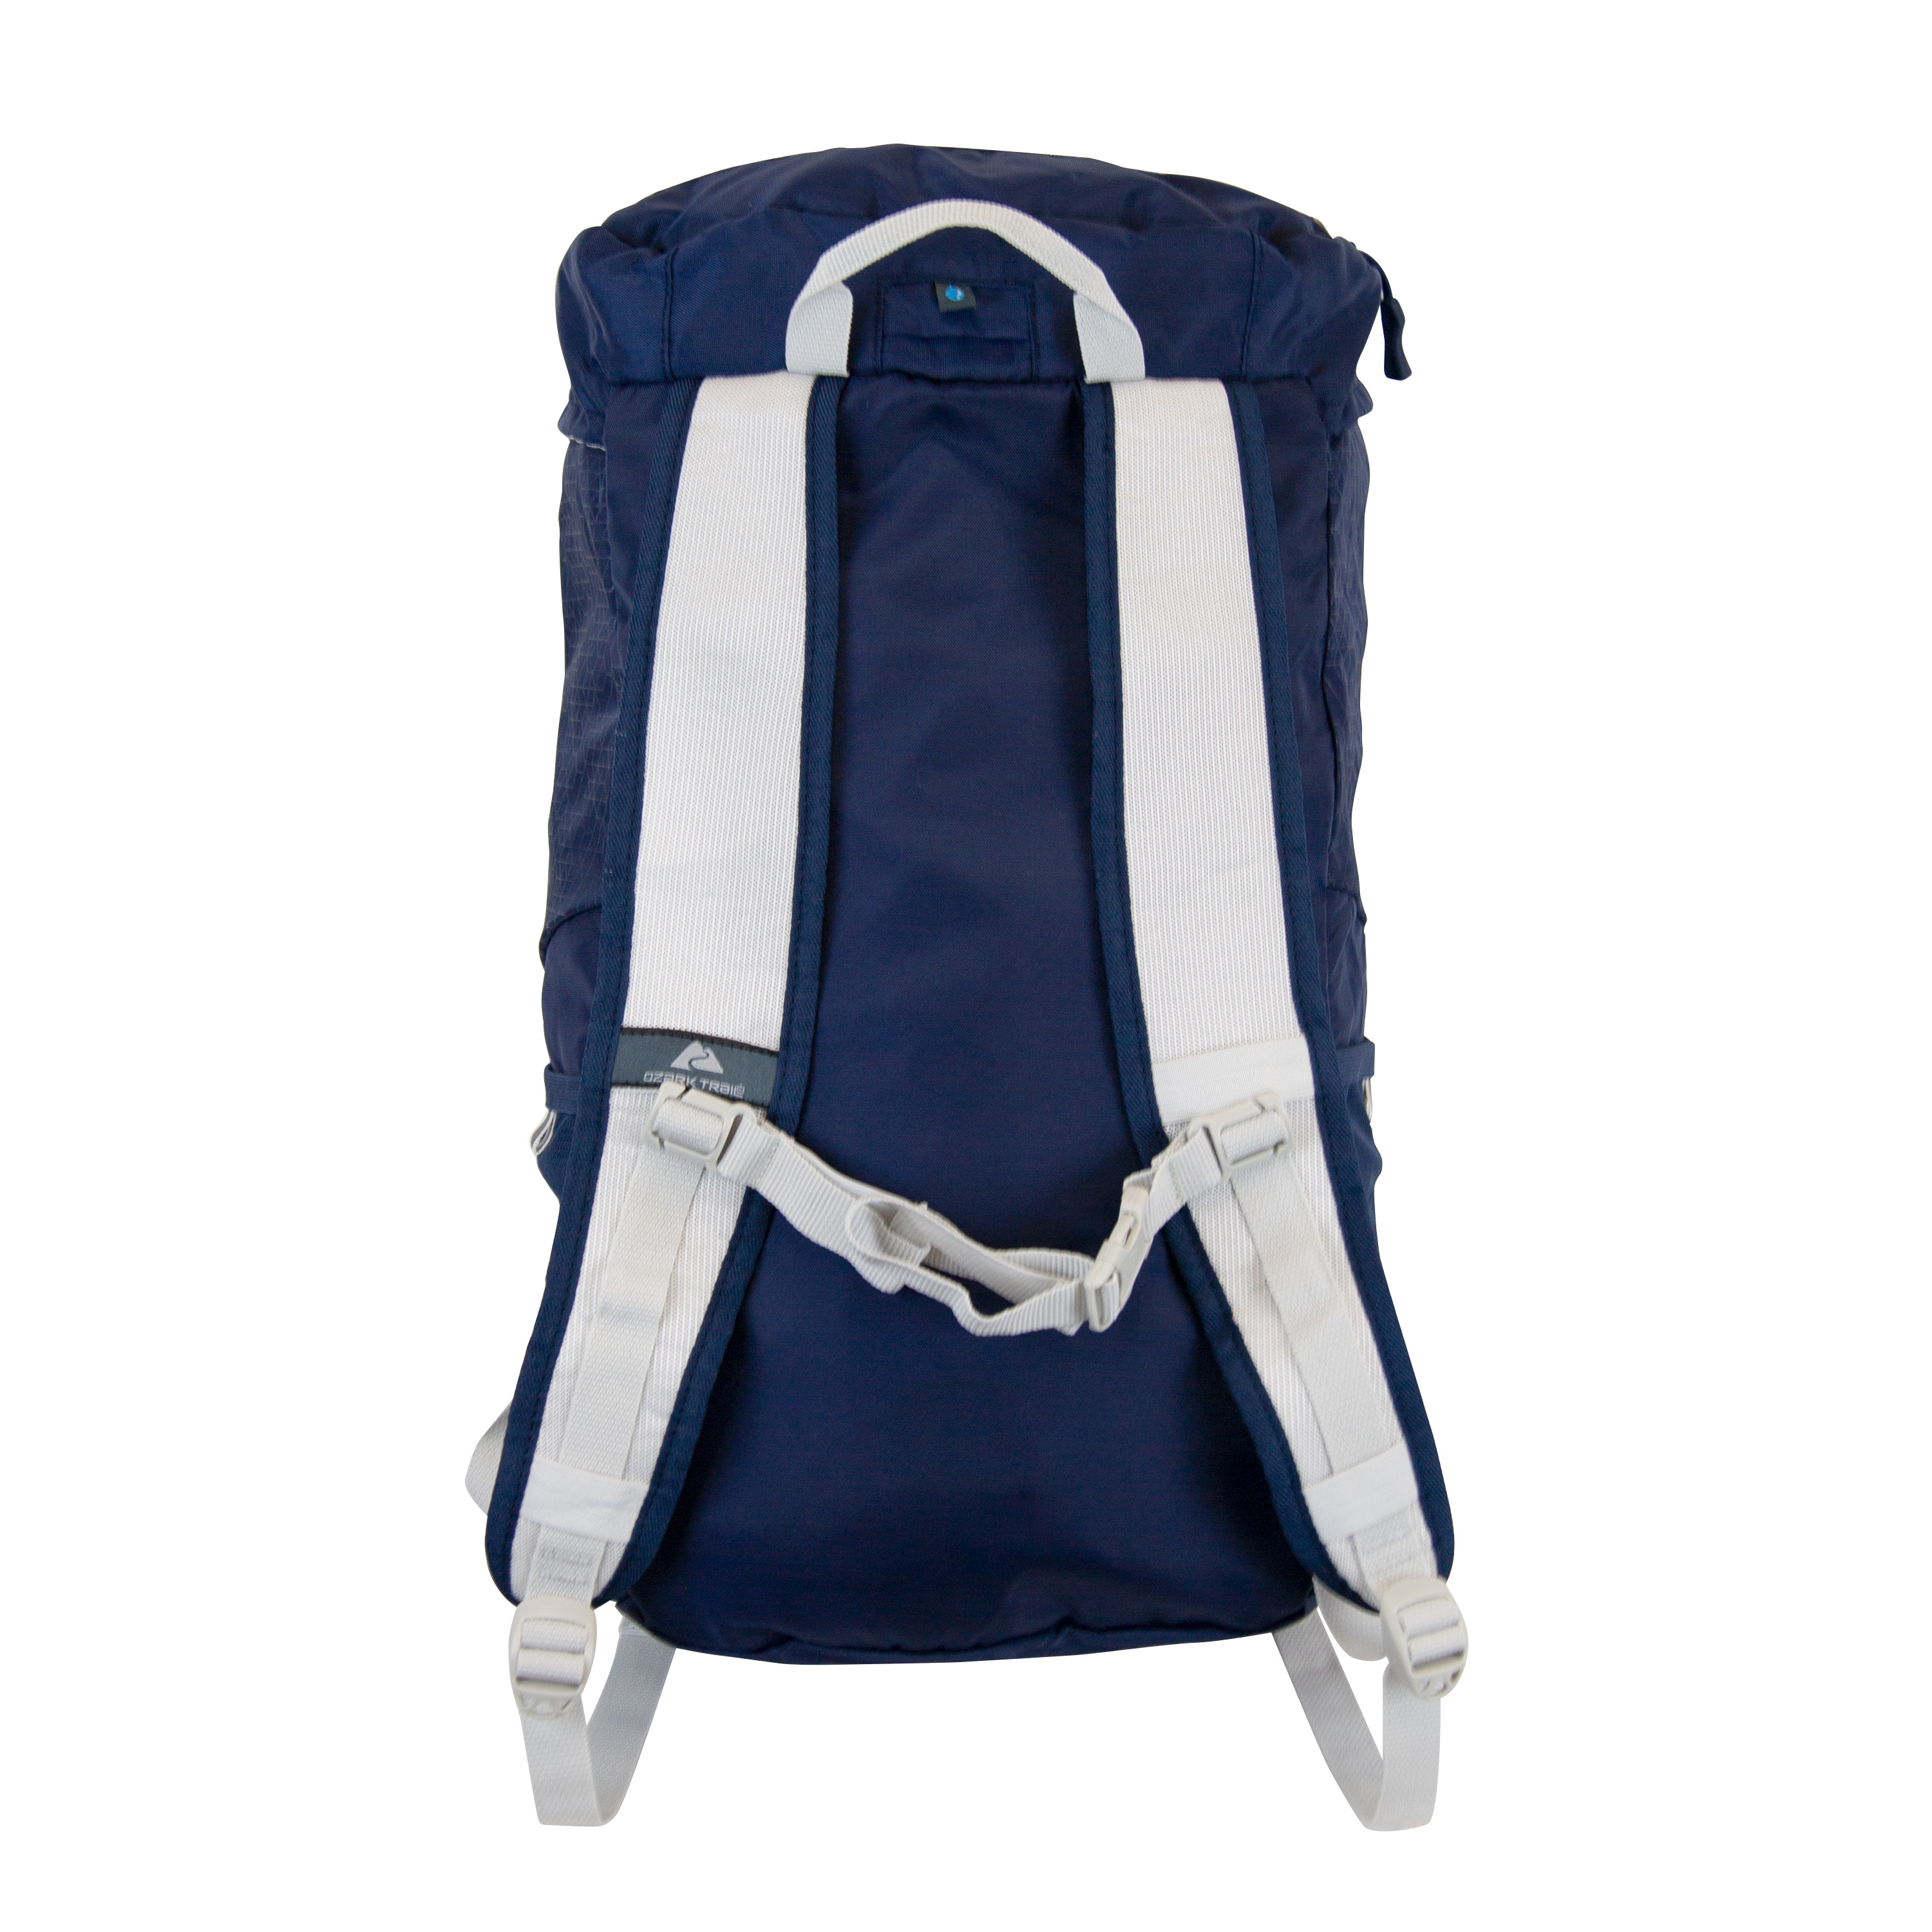 Ozark Trail 28L Gainesville Lightweight Packable Backpack, Hydration Compatible - image 3 of 8